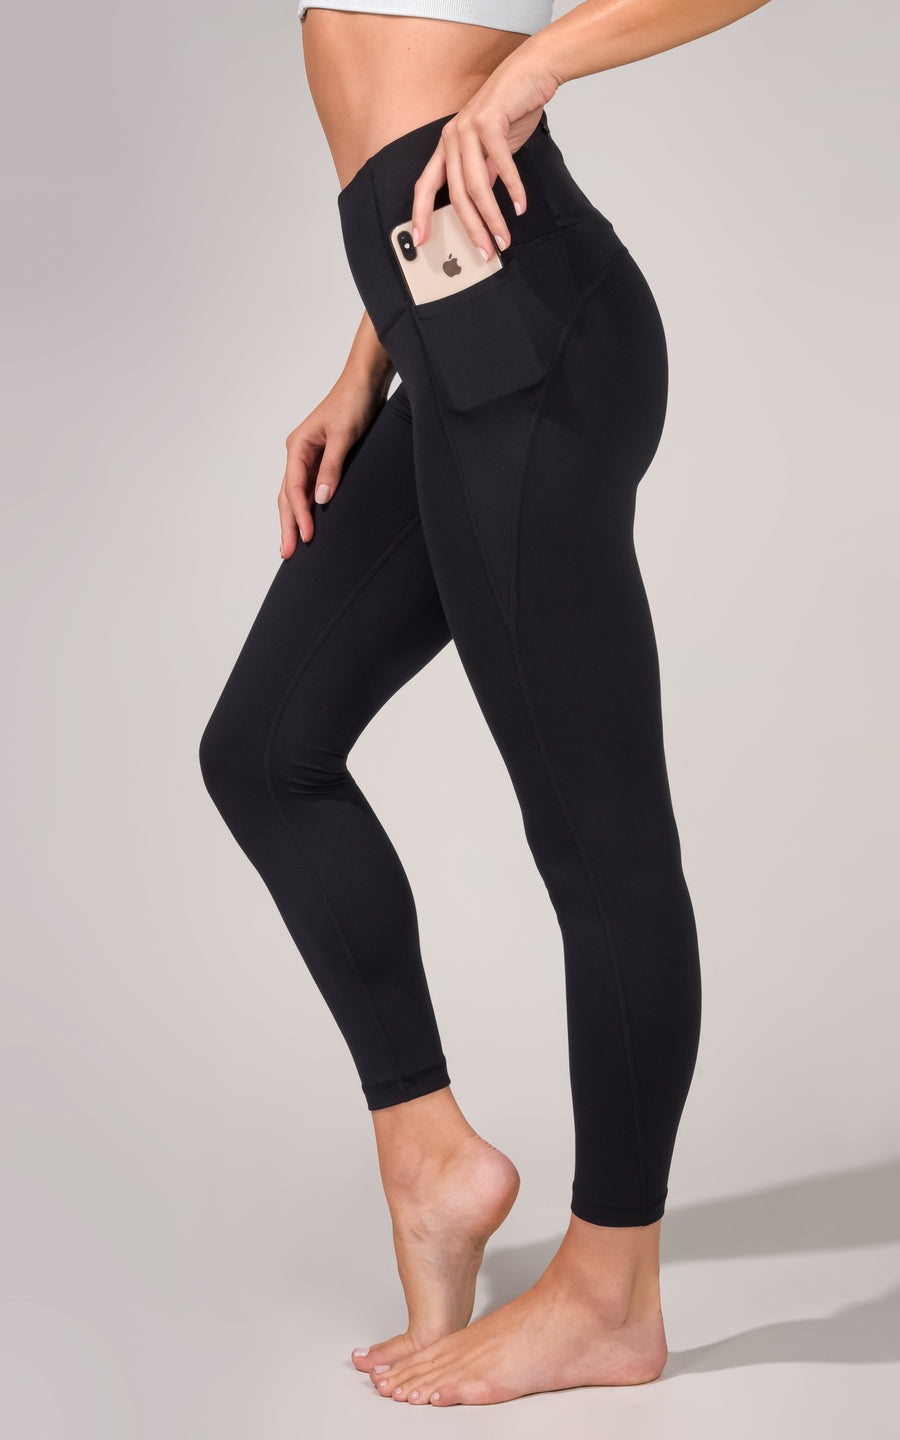 Yogalicious - Women's Lux Super High Rise Ankle Leggings With